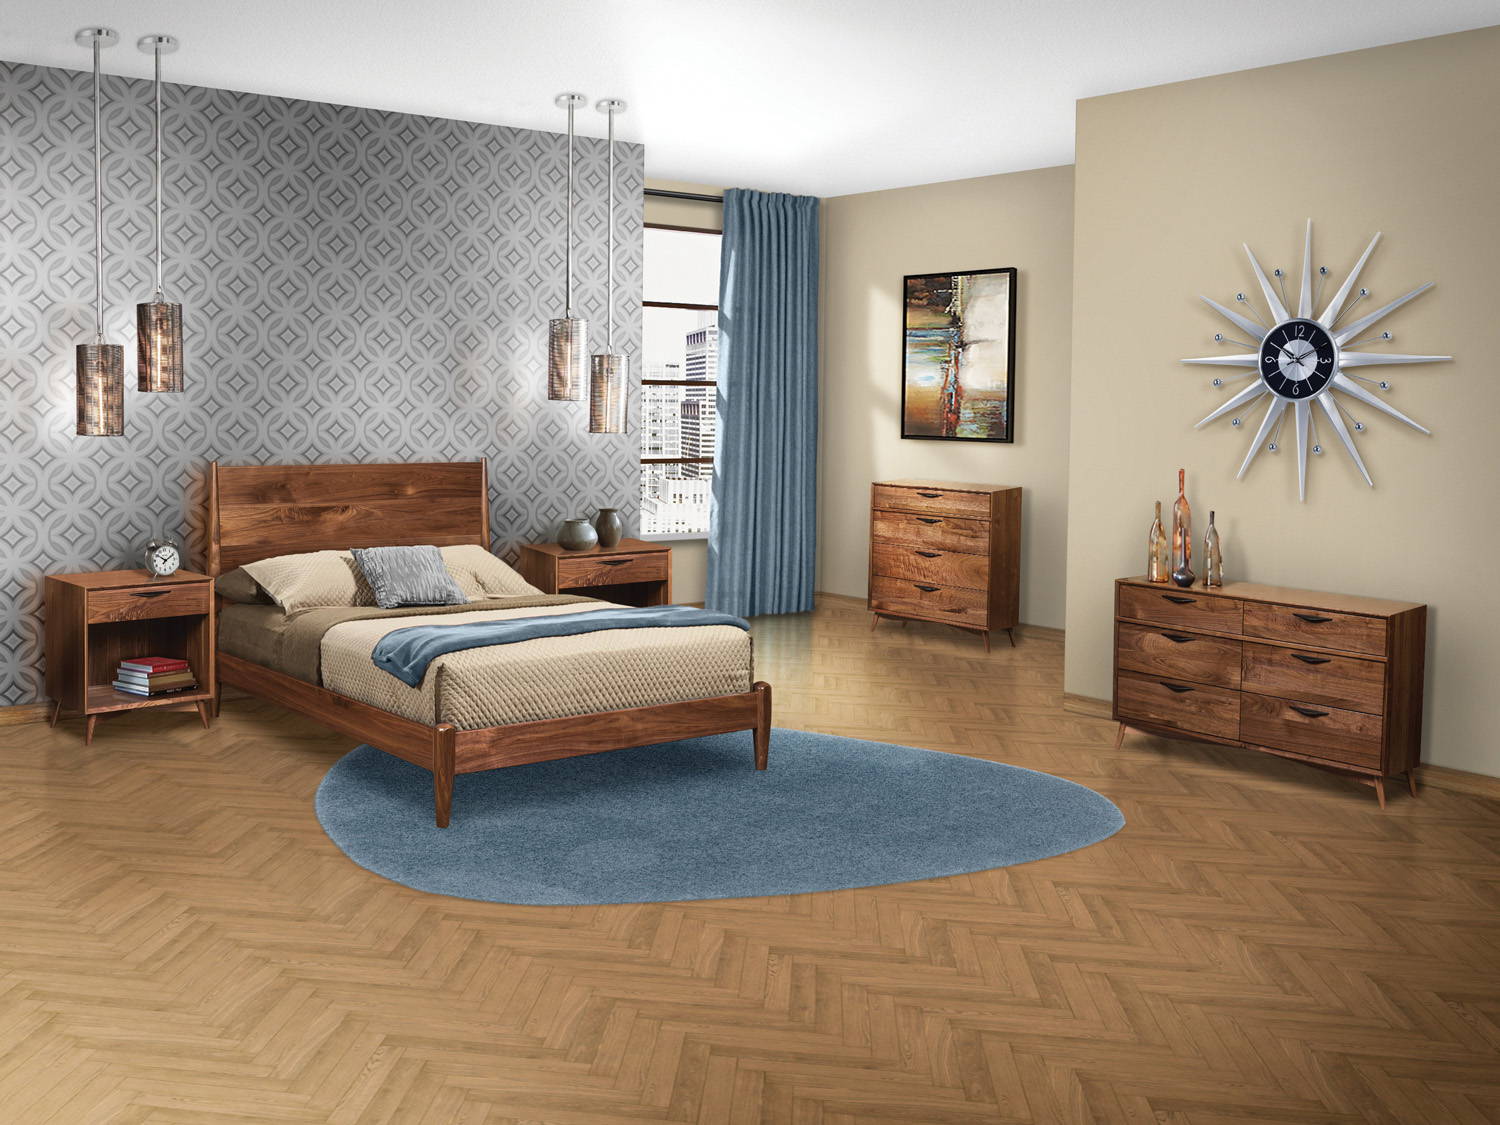 Image of fully customizable Kenton Bedroom Set through Harvest Home Interiors Amish Solid Wood Furniture